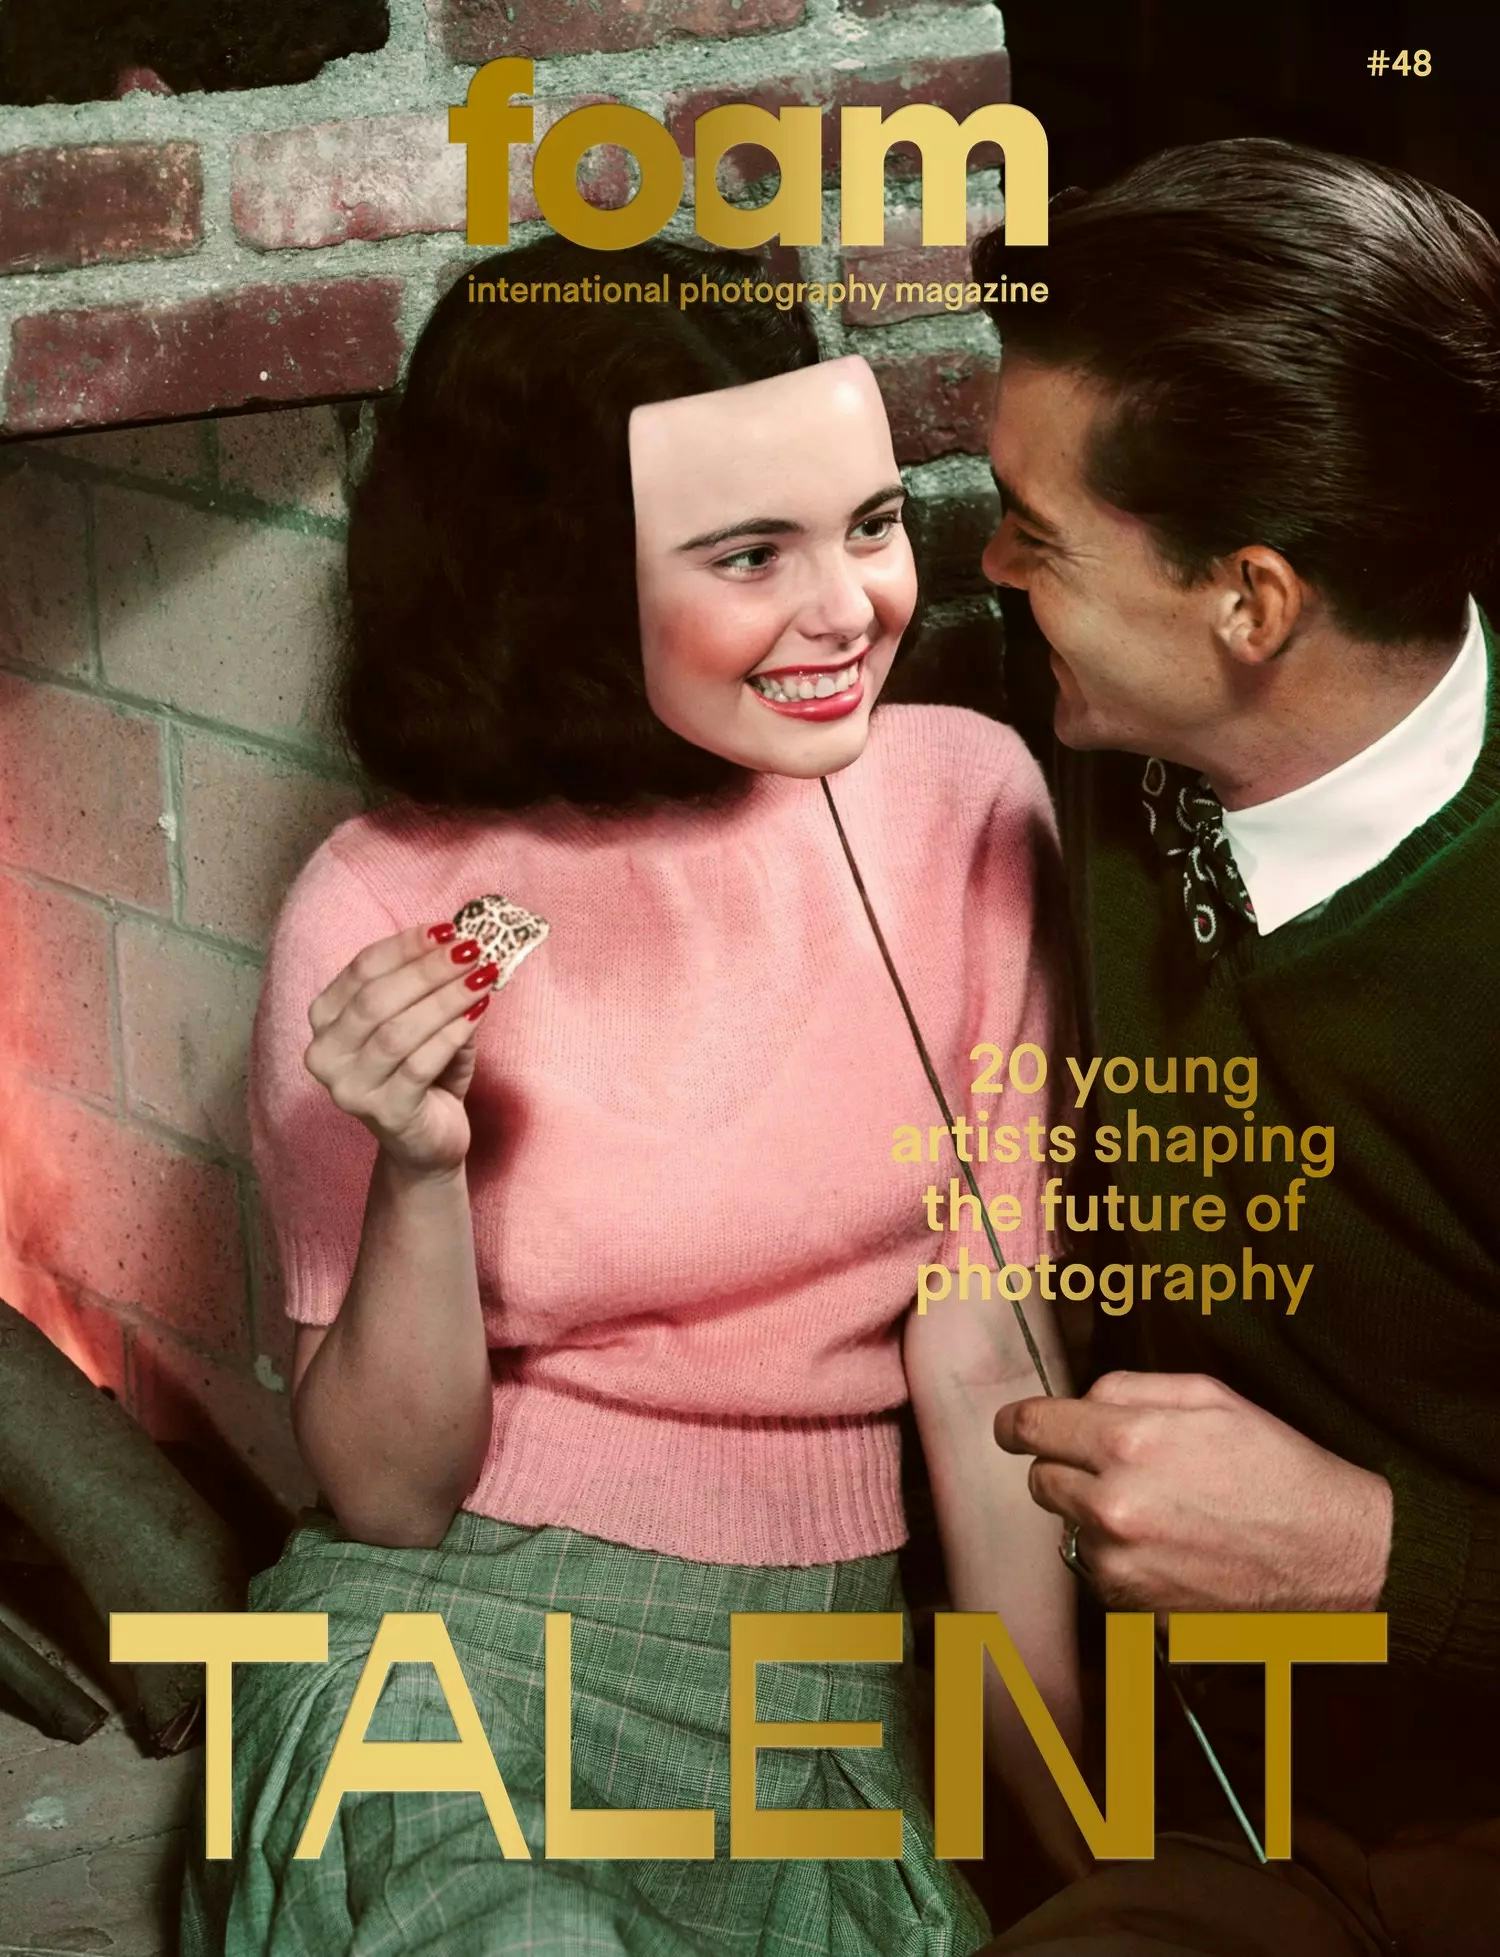 Cover of Foam Magazine #48: Talent issue. Cover image by Weronika Gęsicka